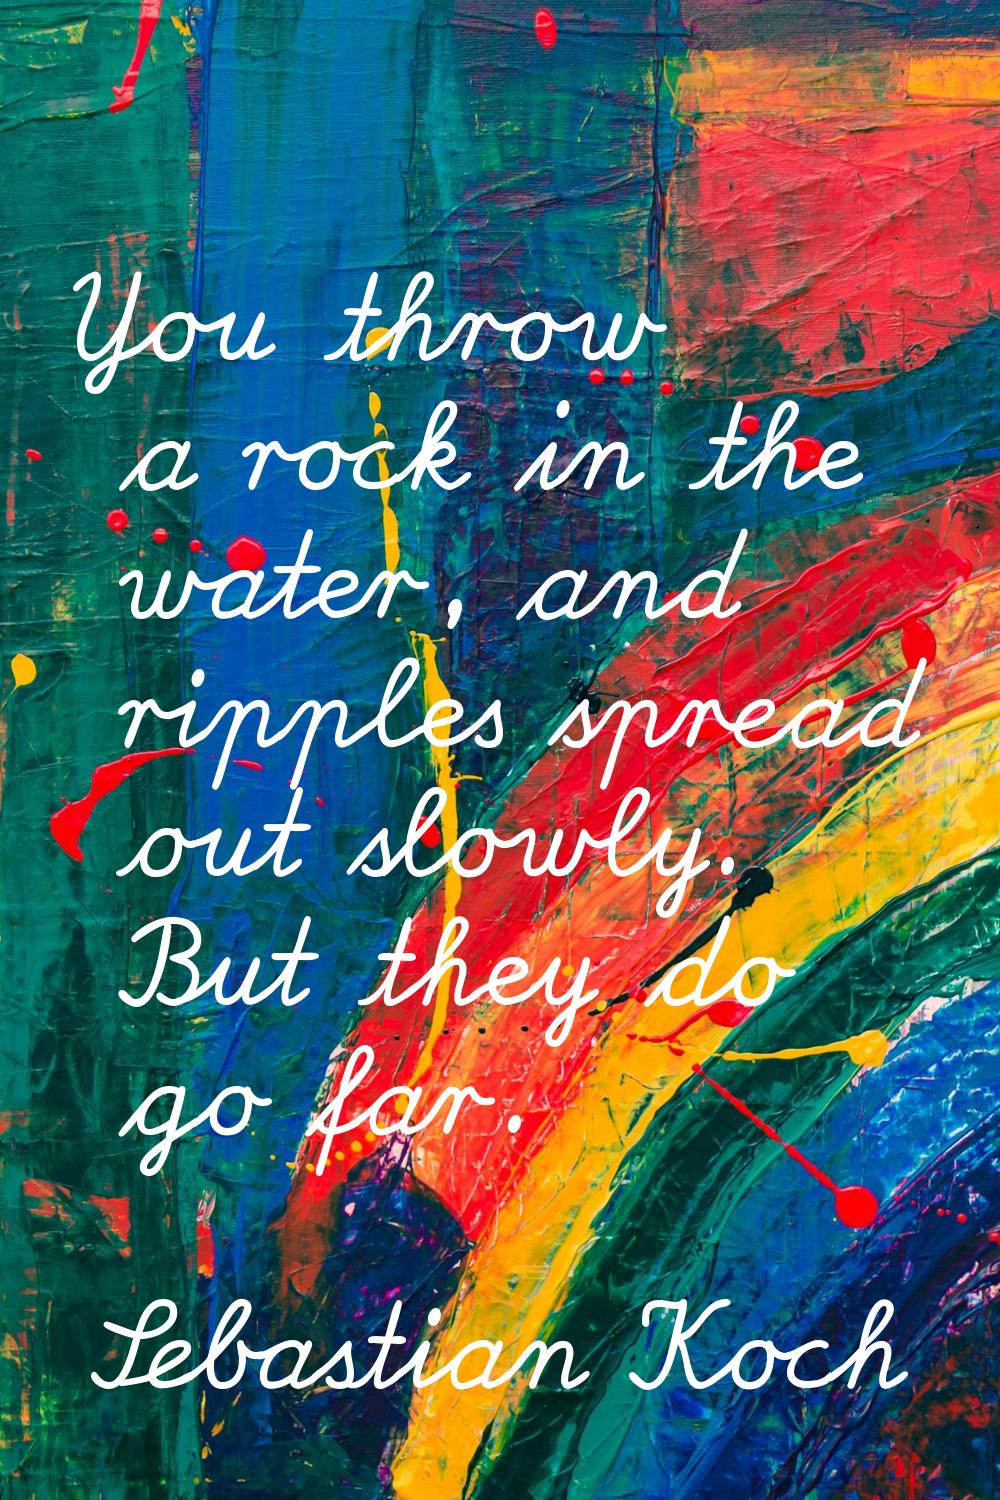 You throw a rock in the water, and ripples spread out slowly. But they do go far.